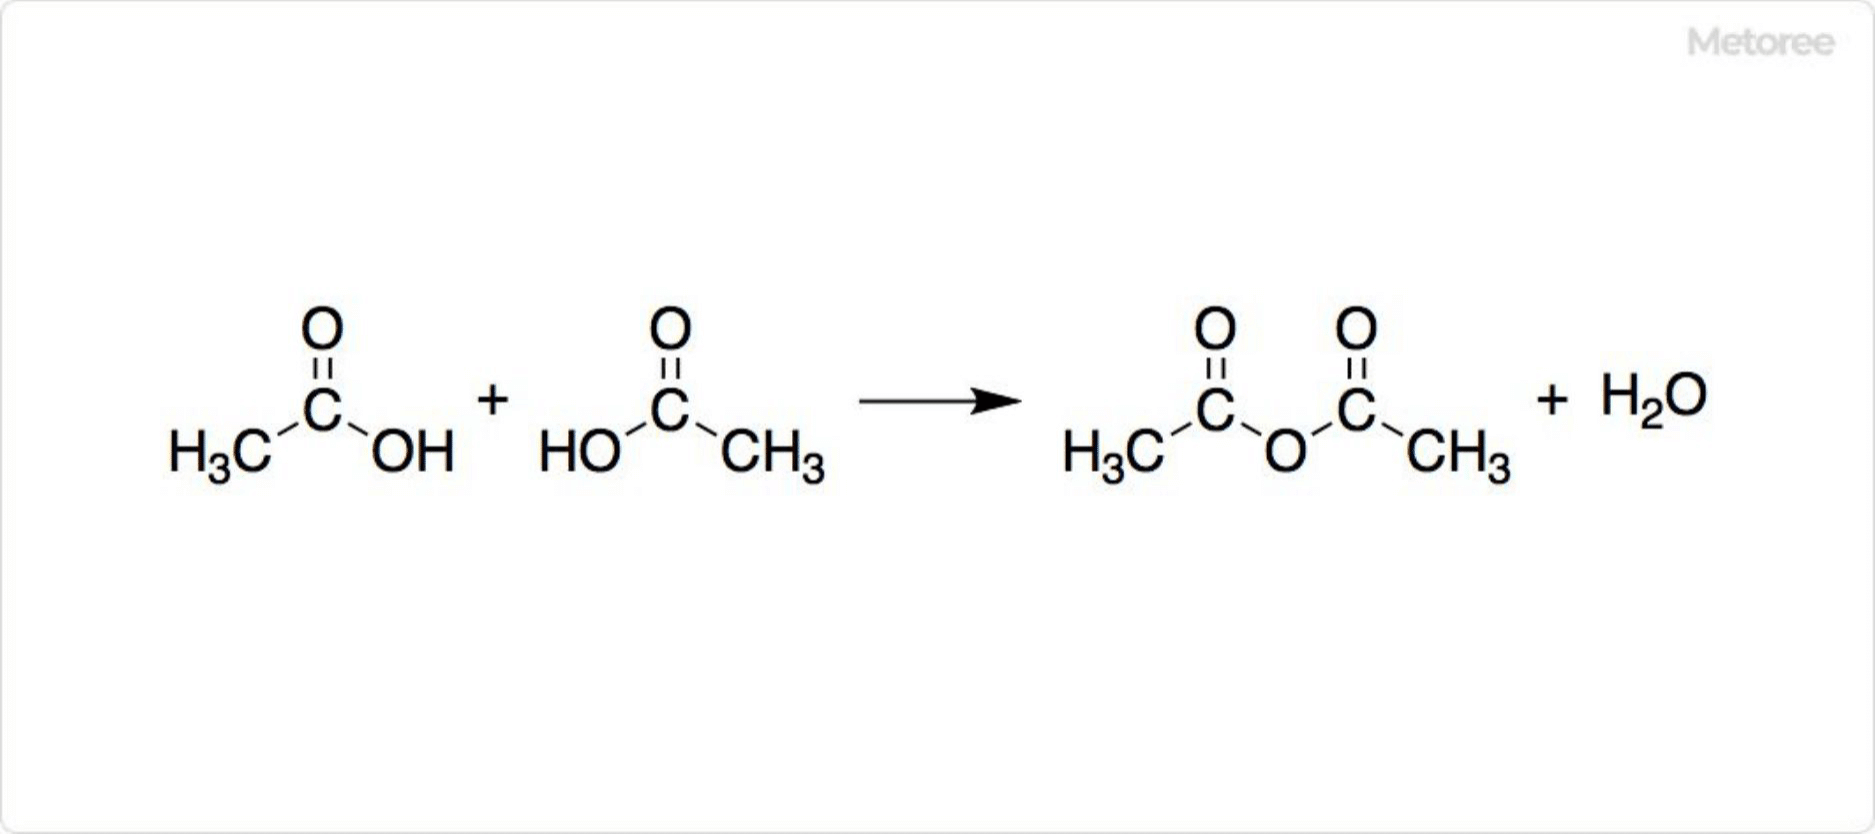 Figure 3. Synthesis of Acetic Anhydride